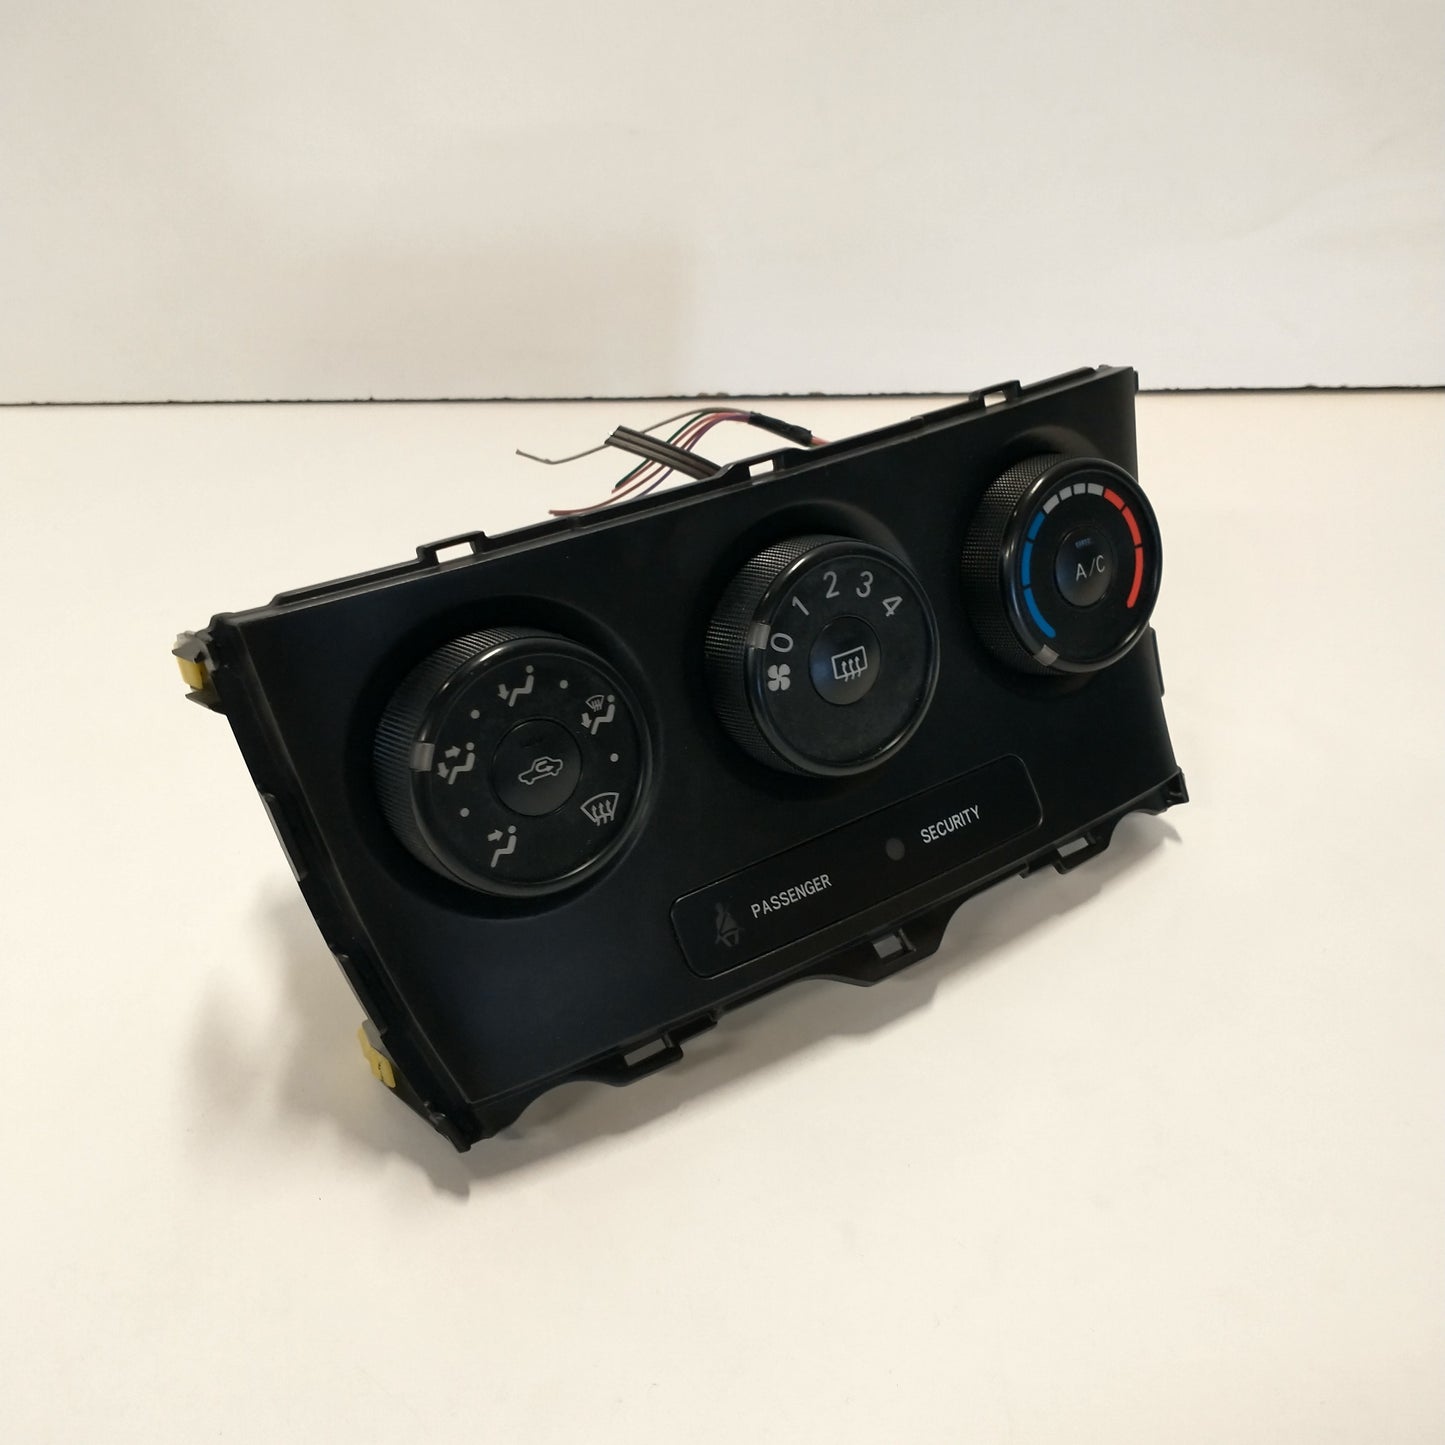 Toyota Corolla Hatchback Heater/Air Conditioning Controls